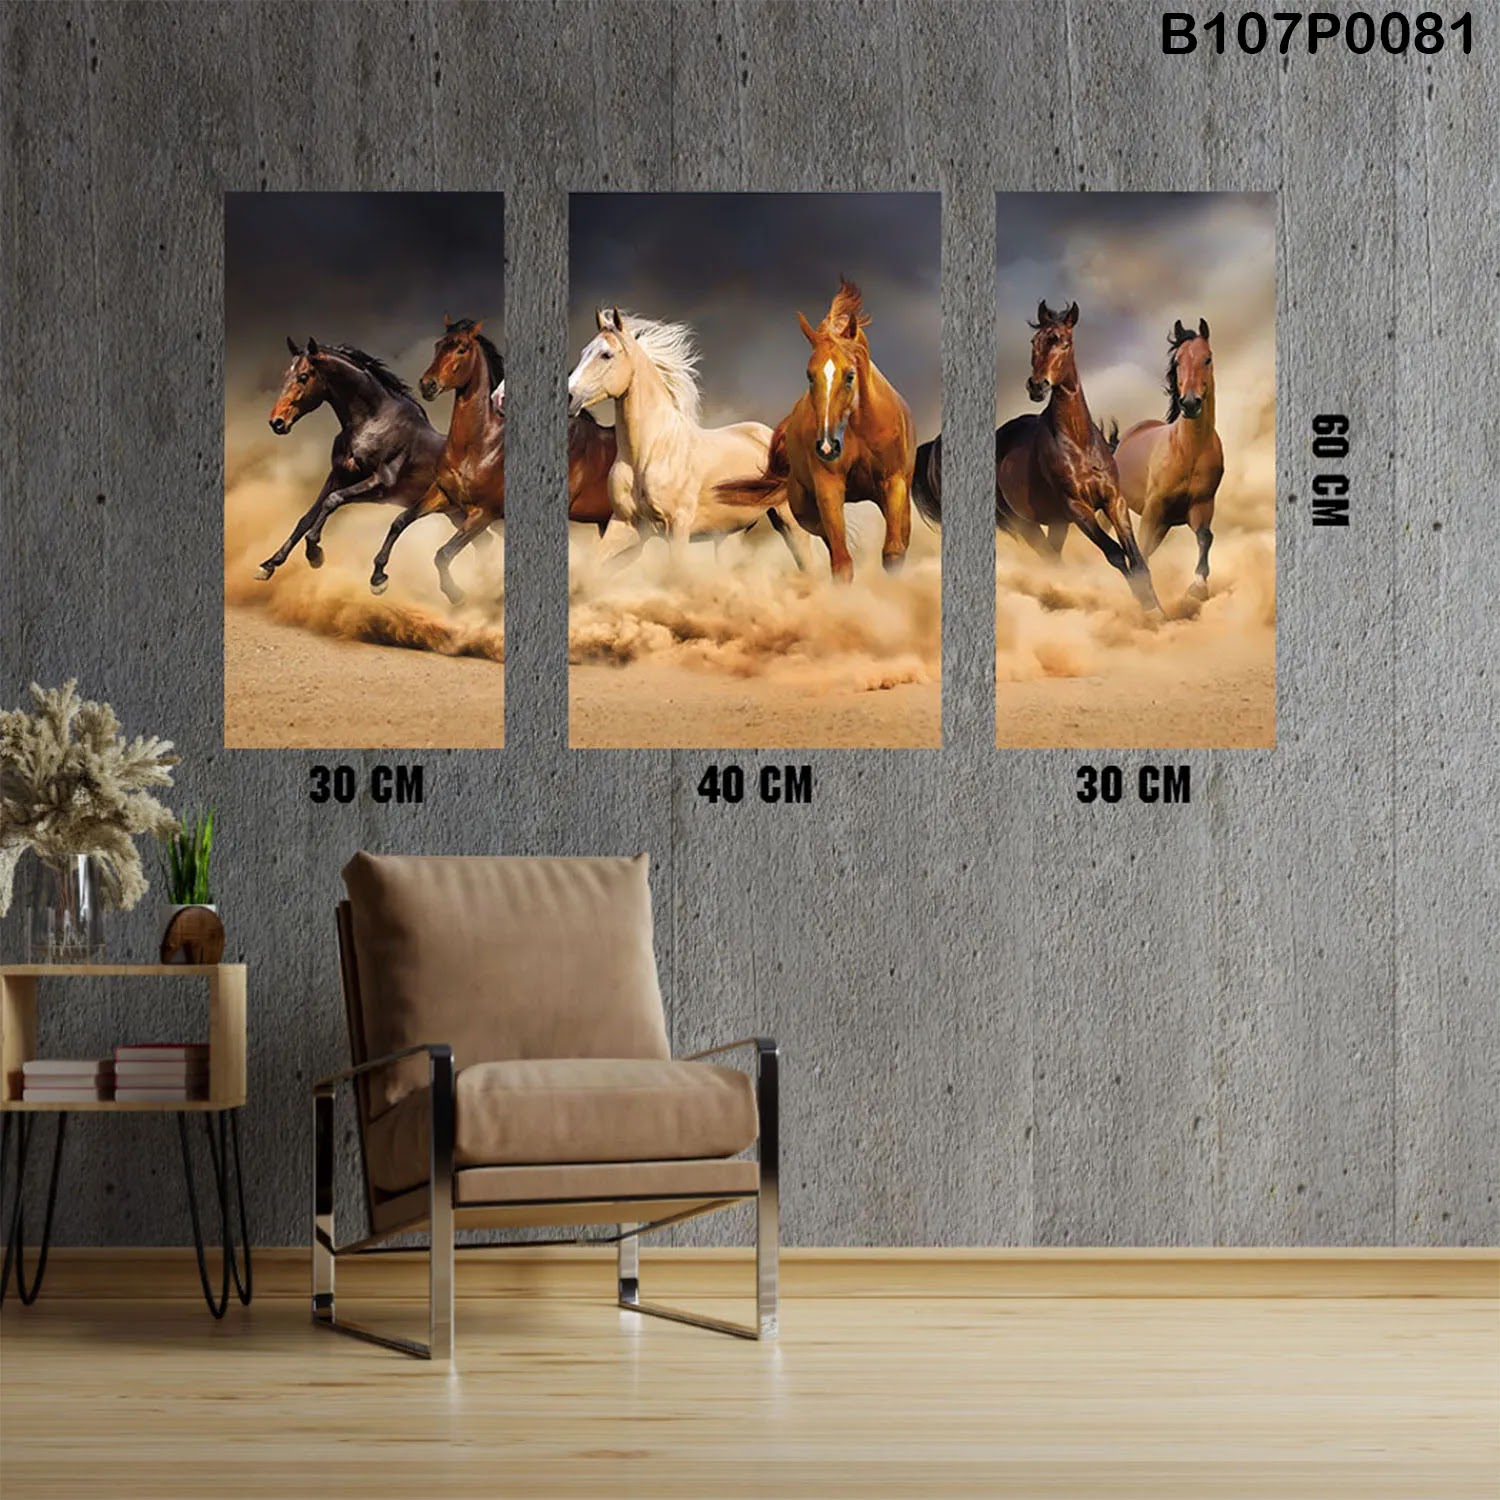 Triptych panel with horses in the desert at night